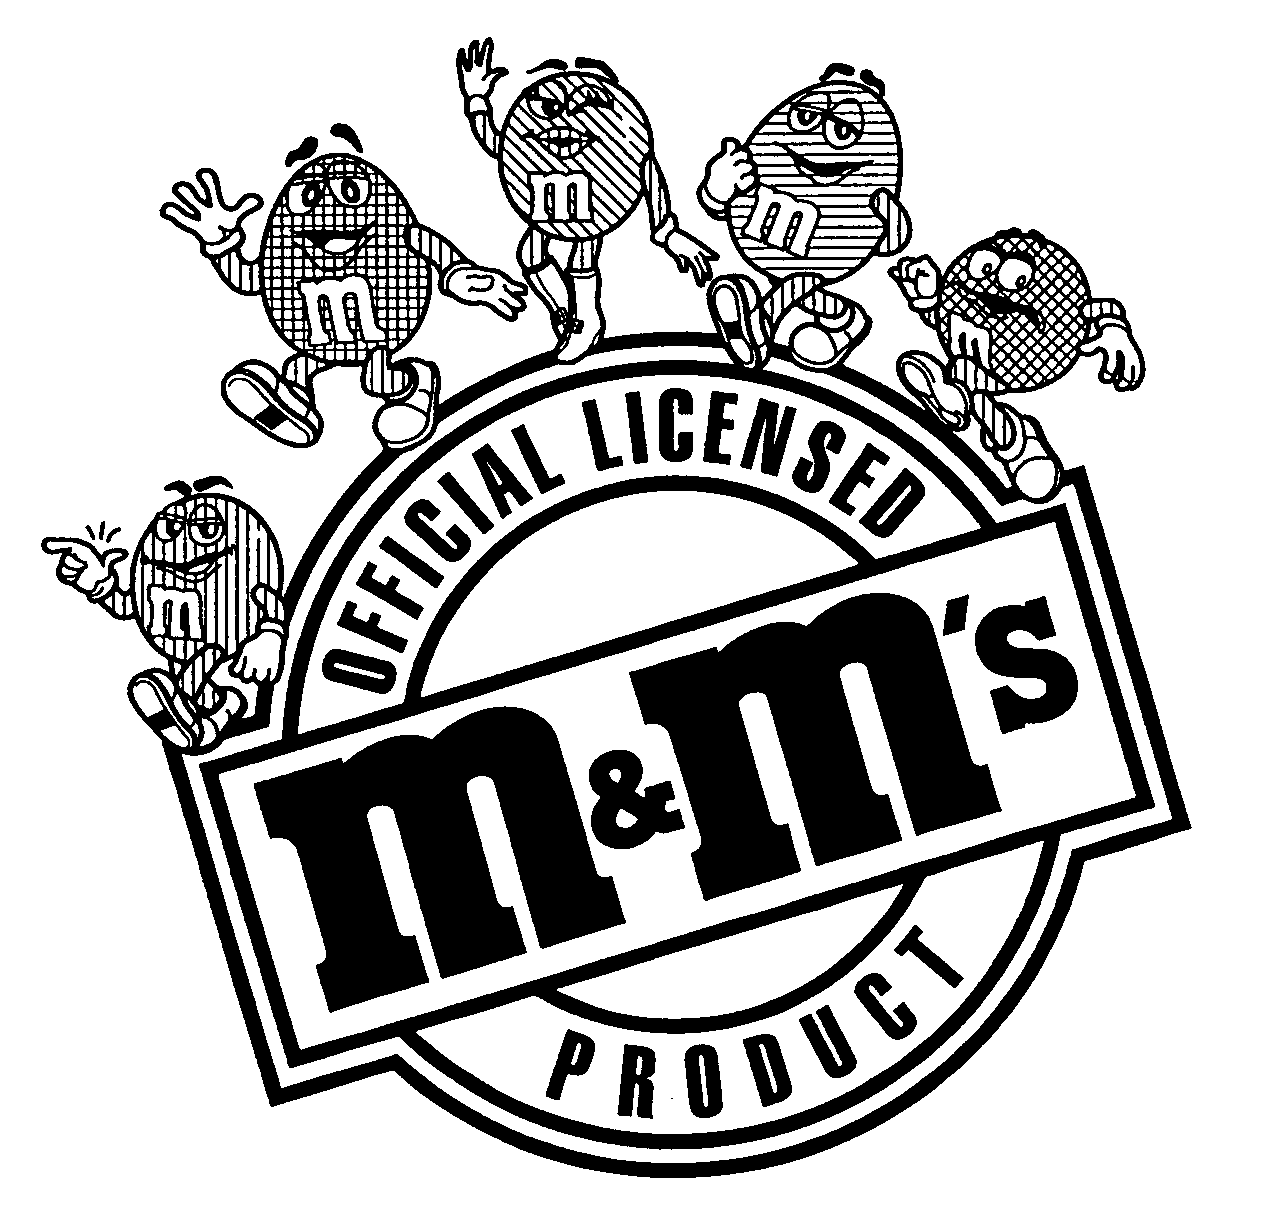  M&amp;M'S OFFICIAL LICENSED PRODUCT